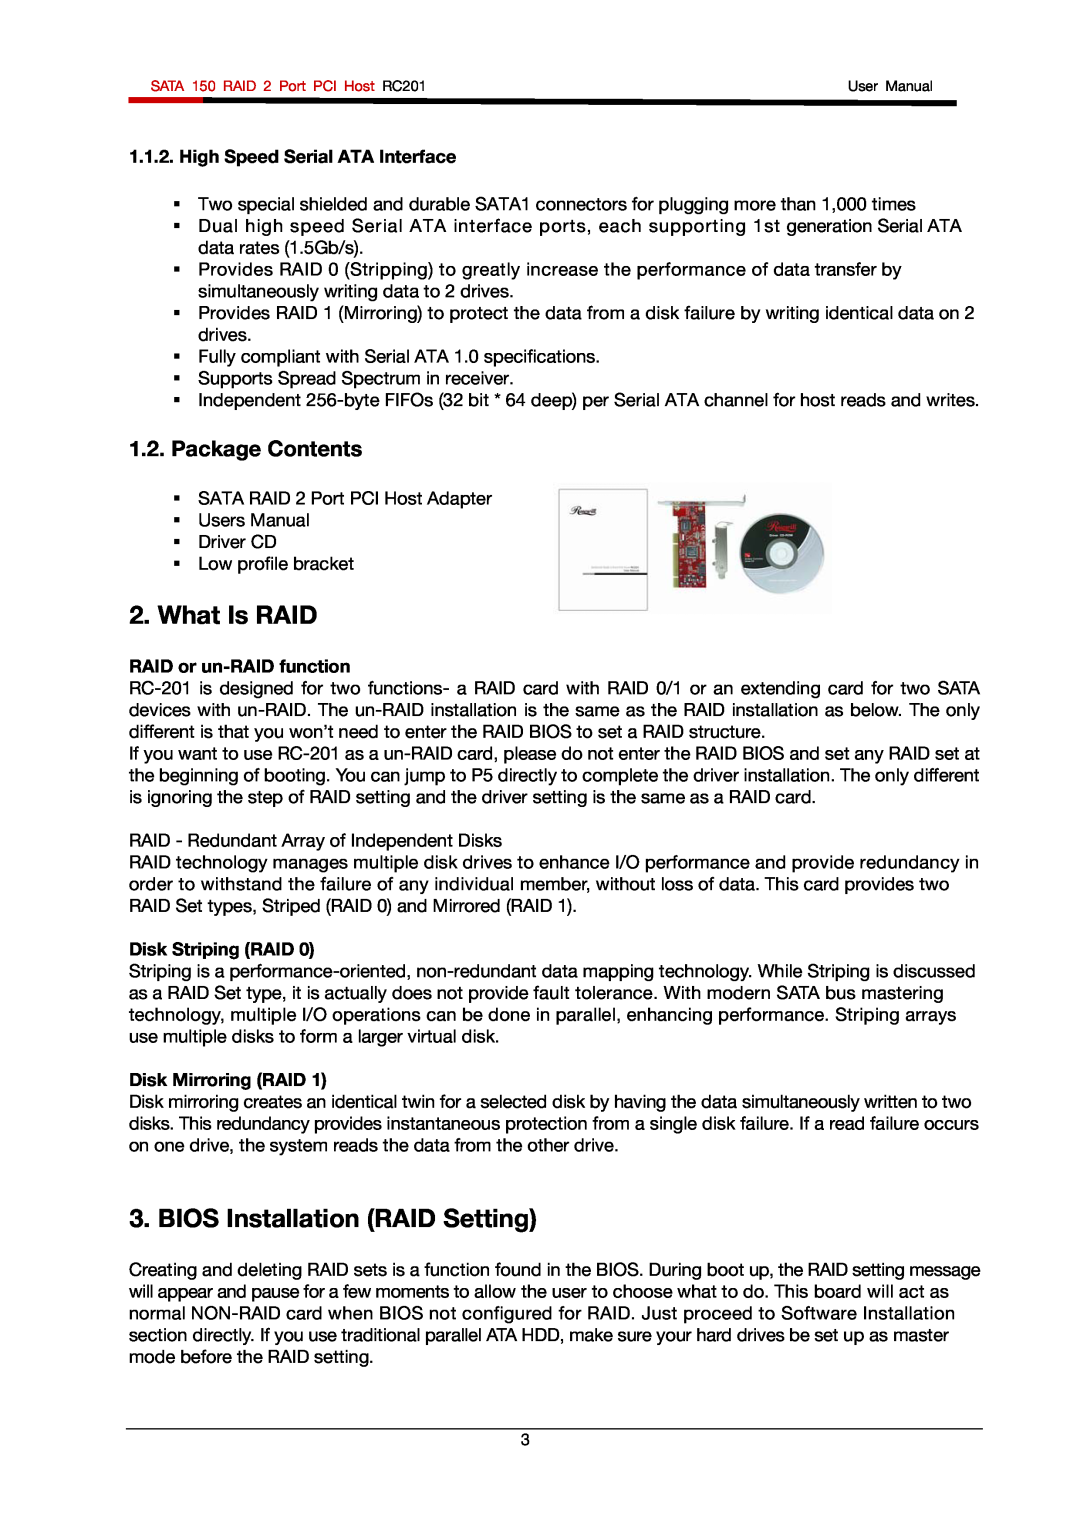 Rosewill RC201 user manual What Is RAID, BIOS Installation RAID Setting, Package Contents 